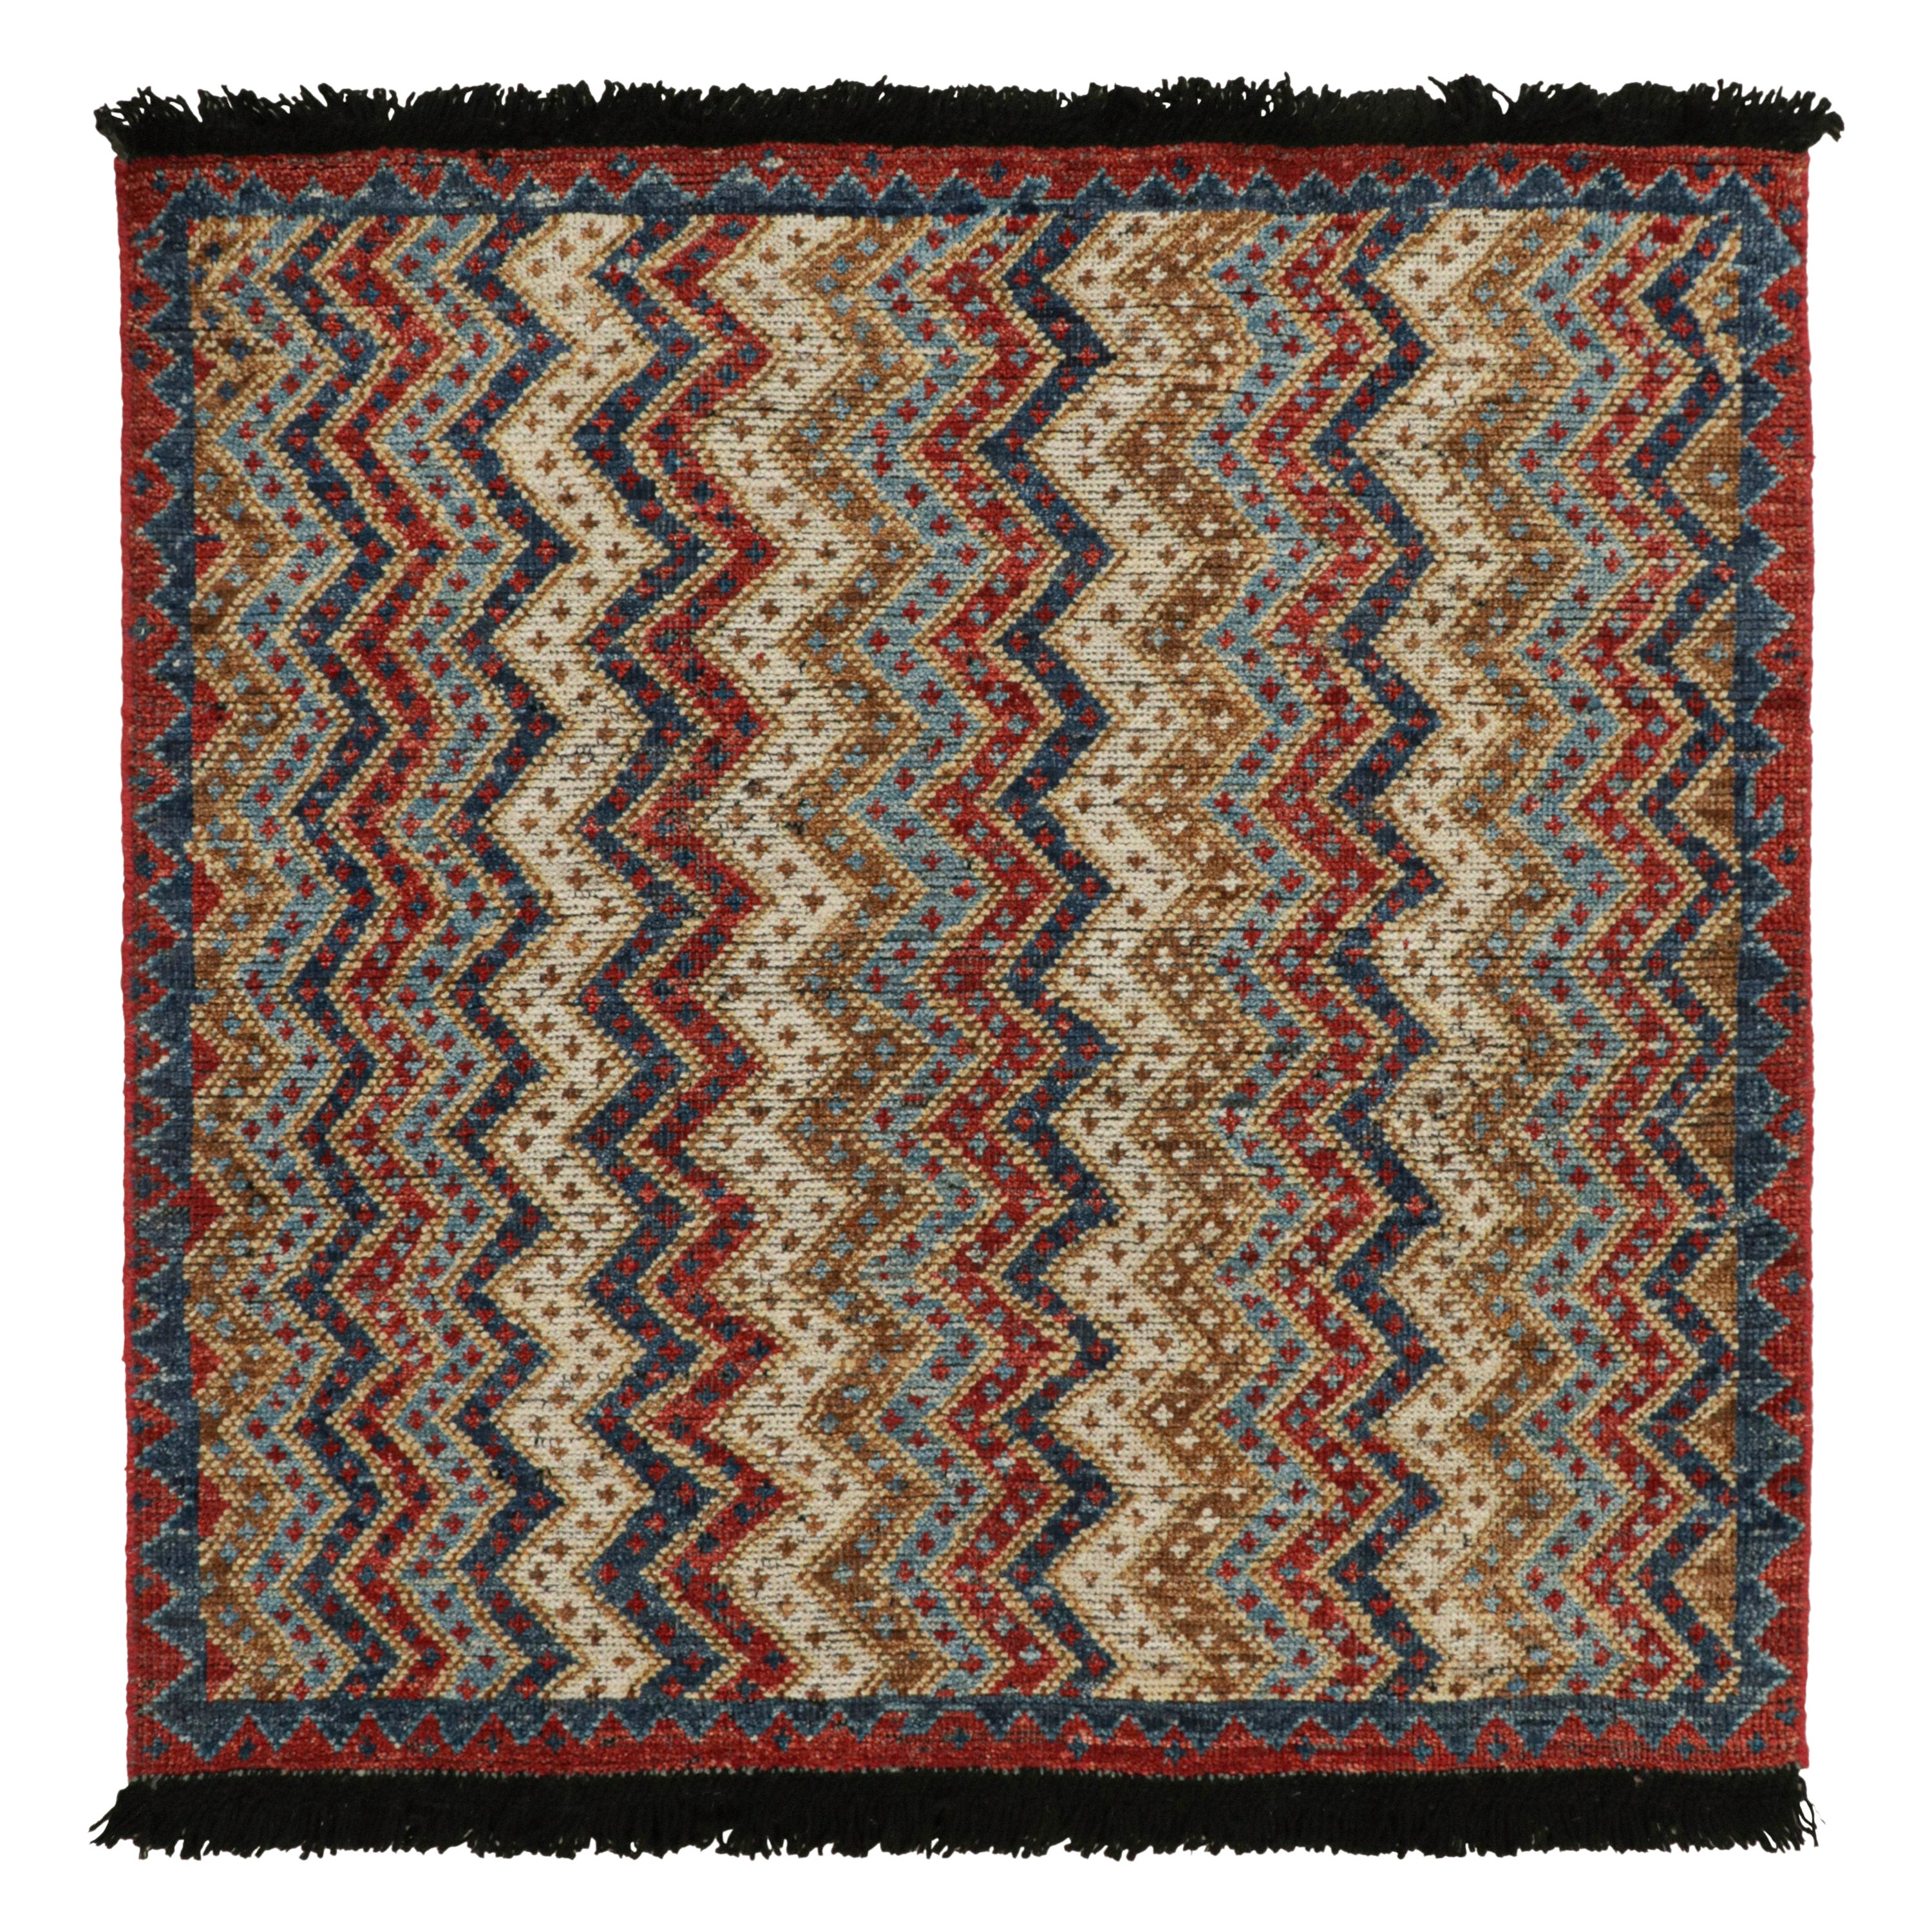 Rug & Kilim’s Antique Tribal Style rug in Red, Blue, Brown & White Patterns For Sale